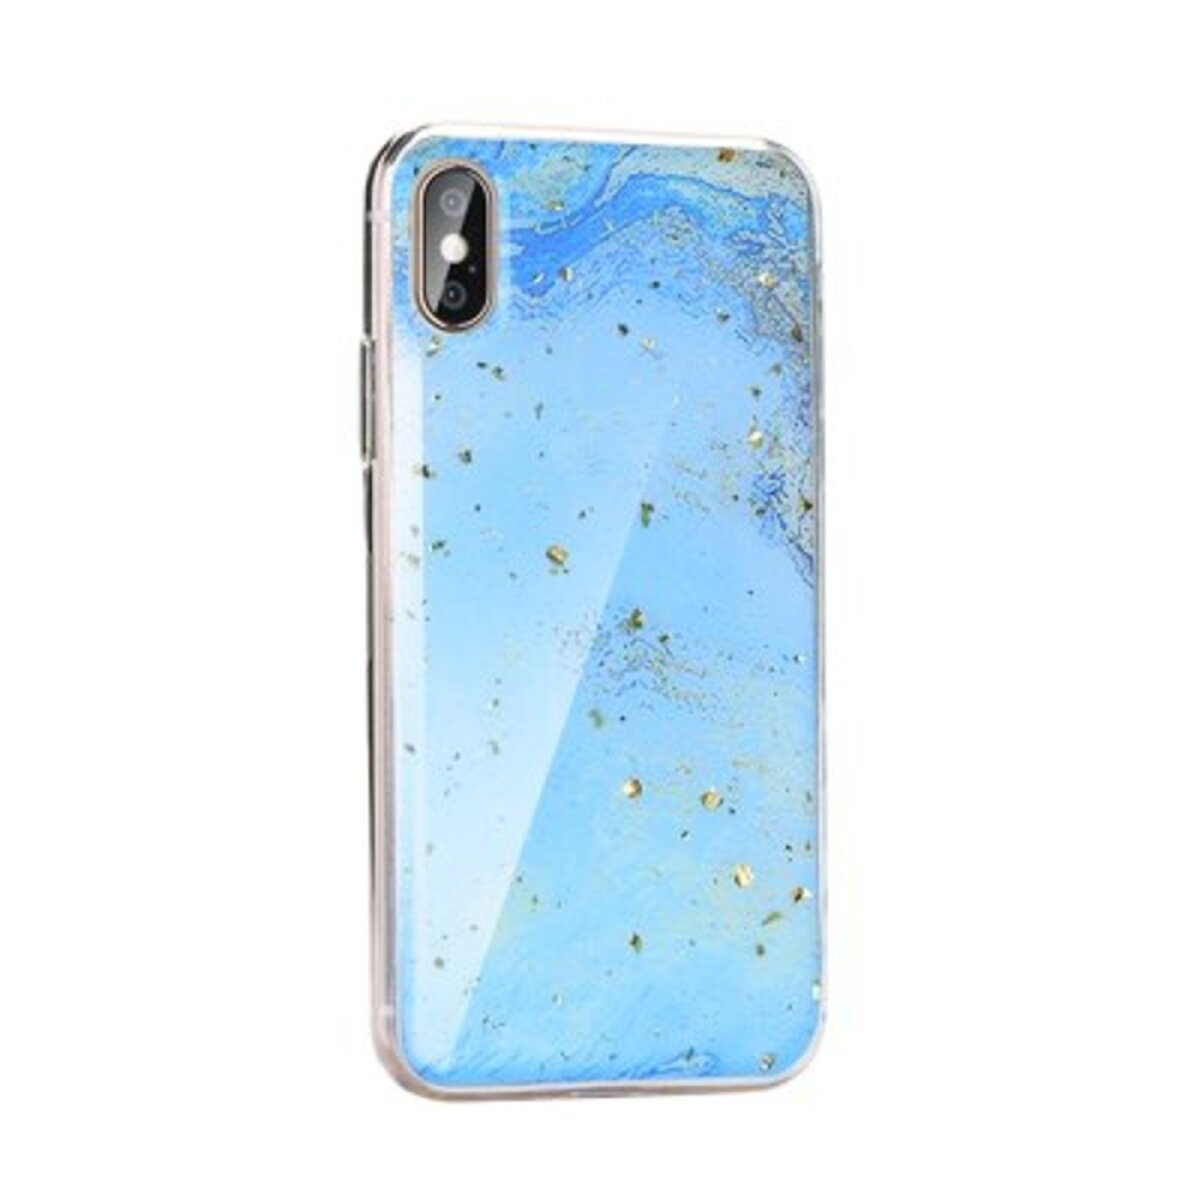 Case Bookcover, A40, MARBLE Galaxy FORCELL A40 3, Galaxy available Samsung, Not design